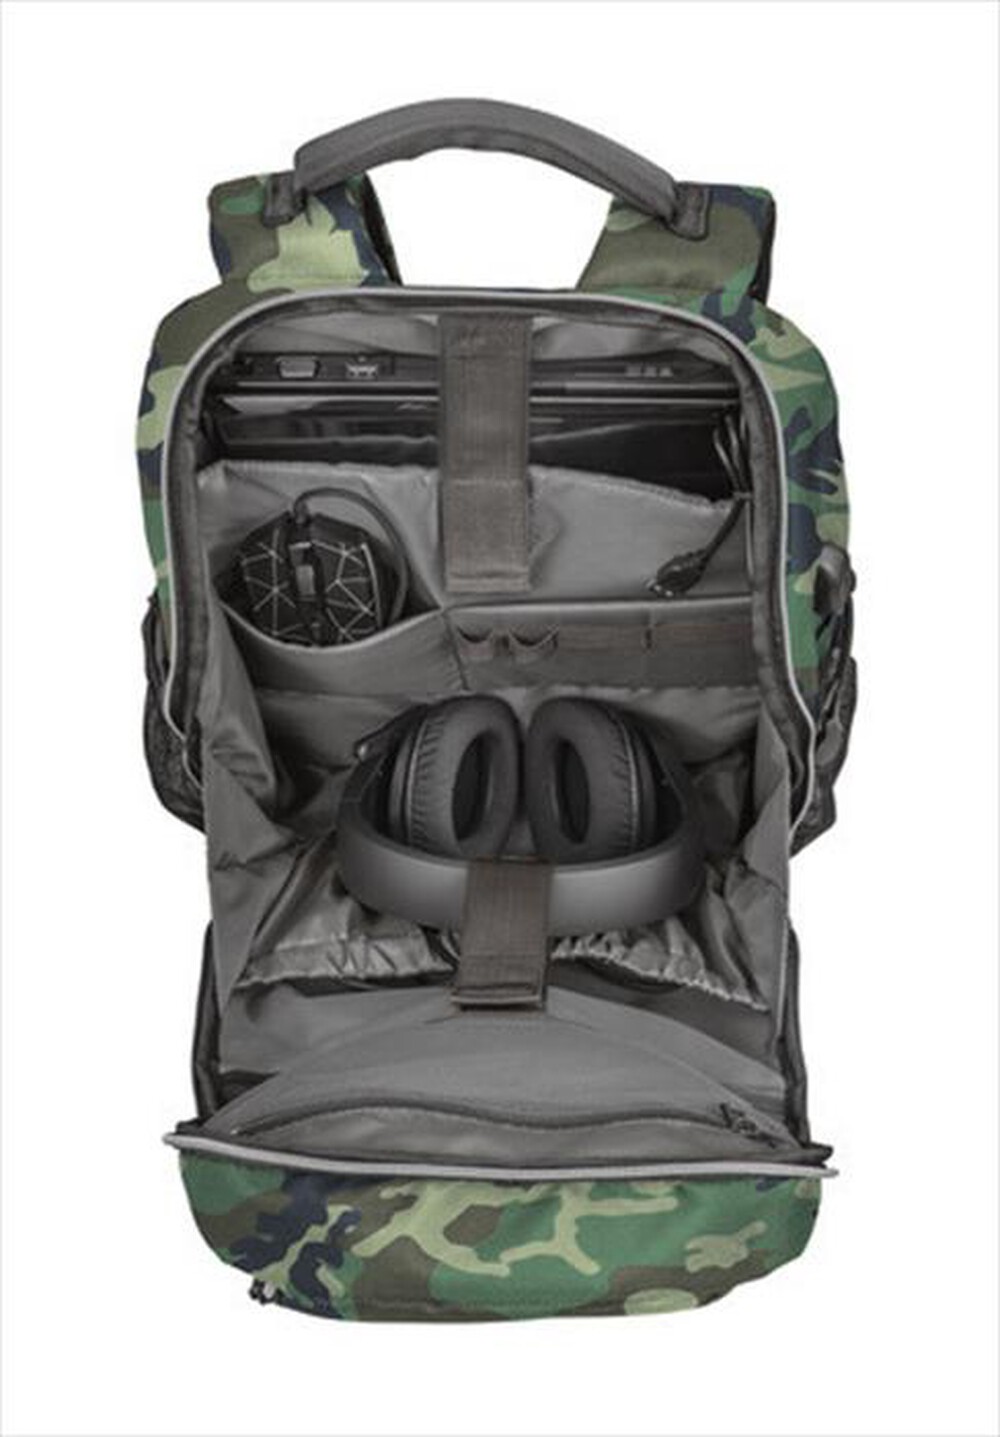 "TRUST - GXT1255 OUTLAW BACKPACK - Camouflage"